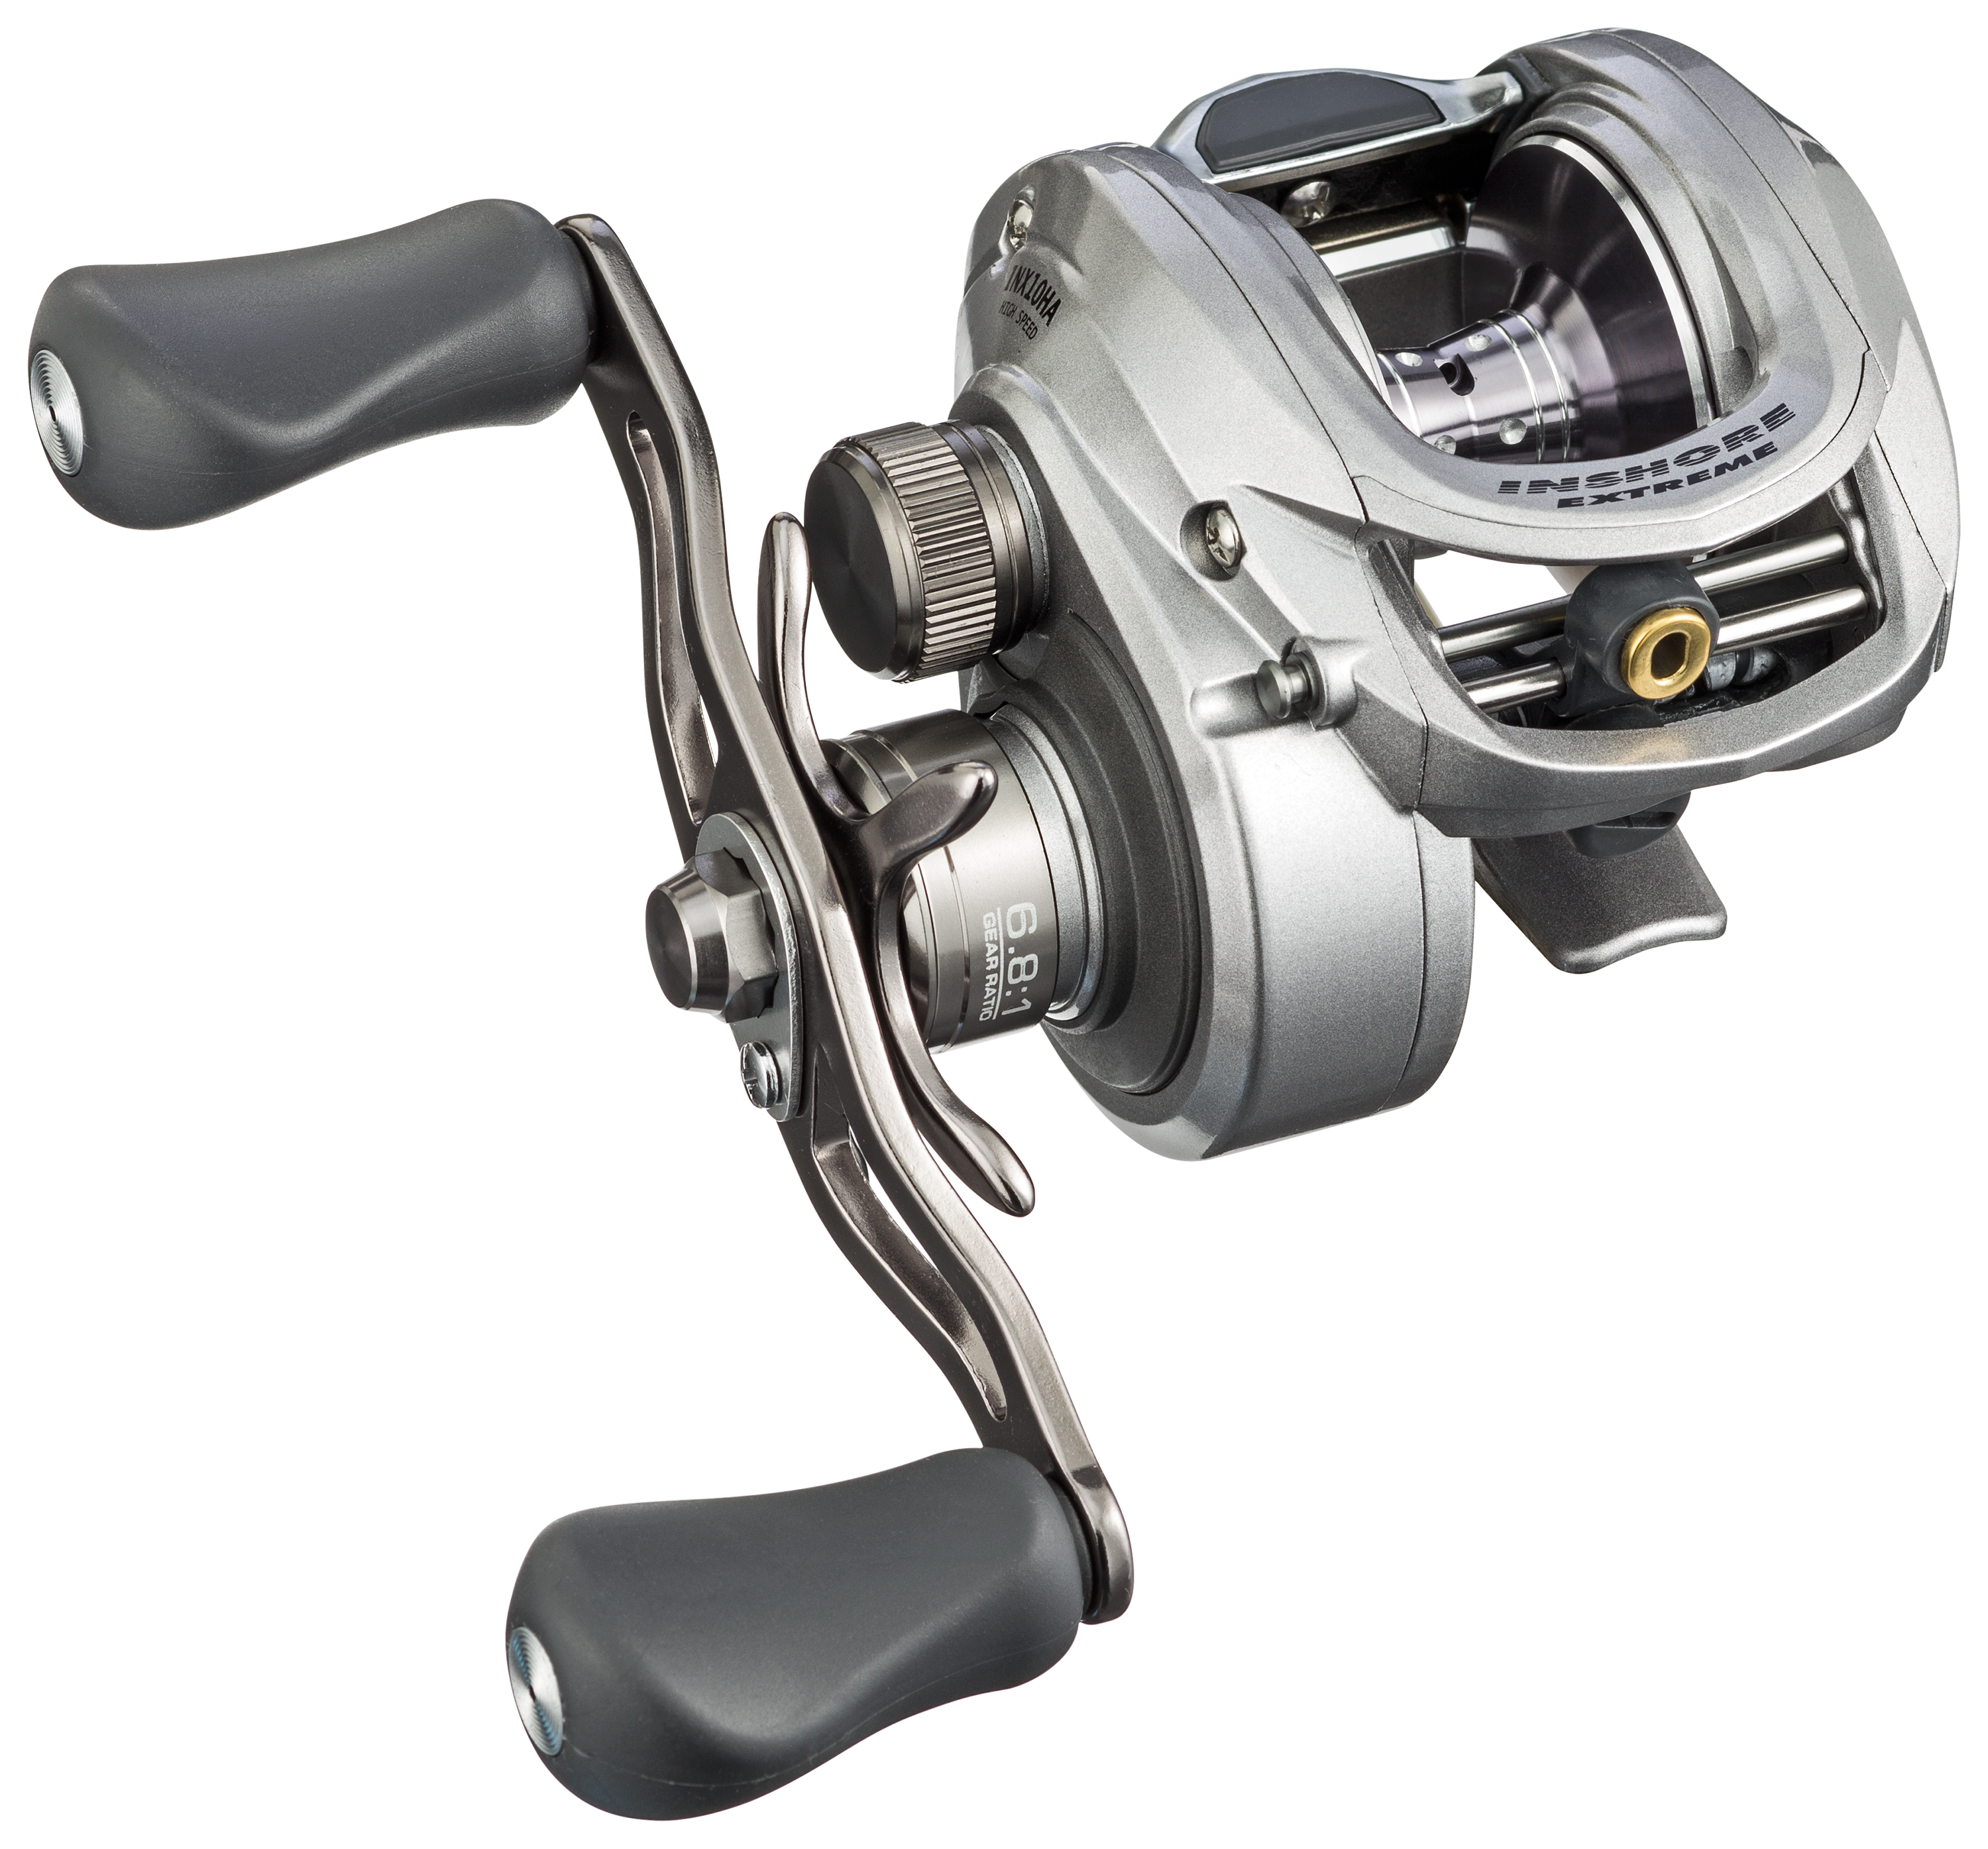 Cabelas or Bass Pro, All Pro BaitCasting Reel, Works Great Right